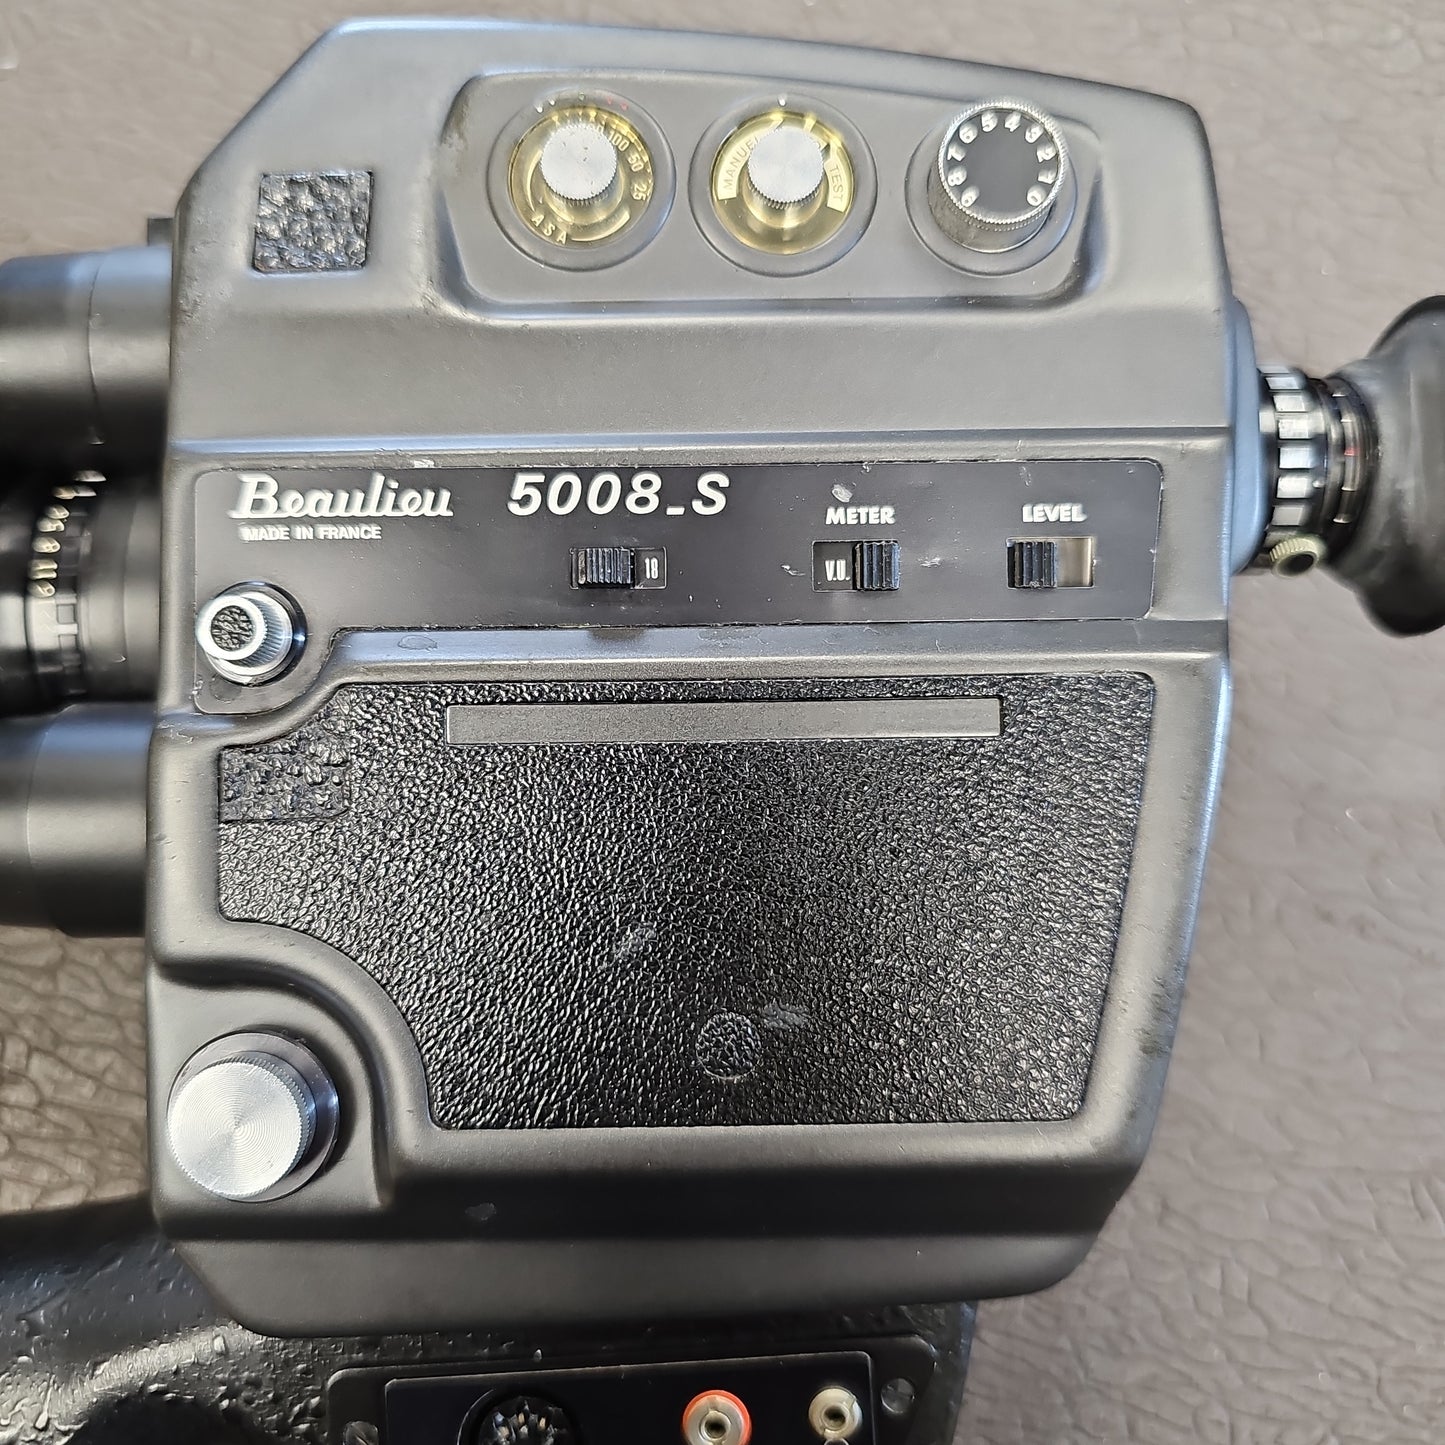 Beaulieu 5008.S Super 8mm Camera S# 445183 with Angenieux 6-80mm T1.2 Zoom lens S# 1402332